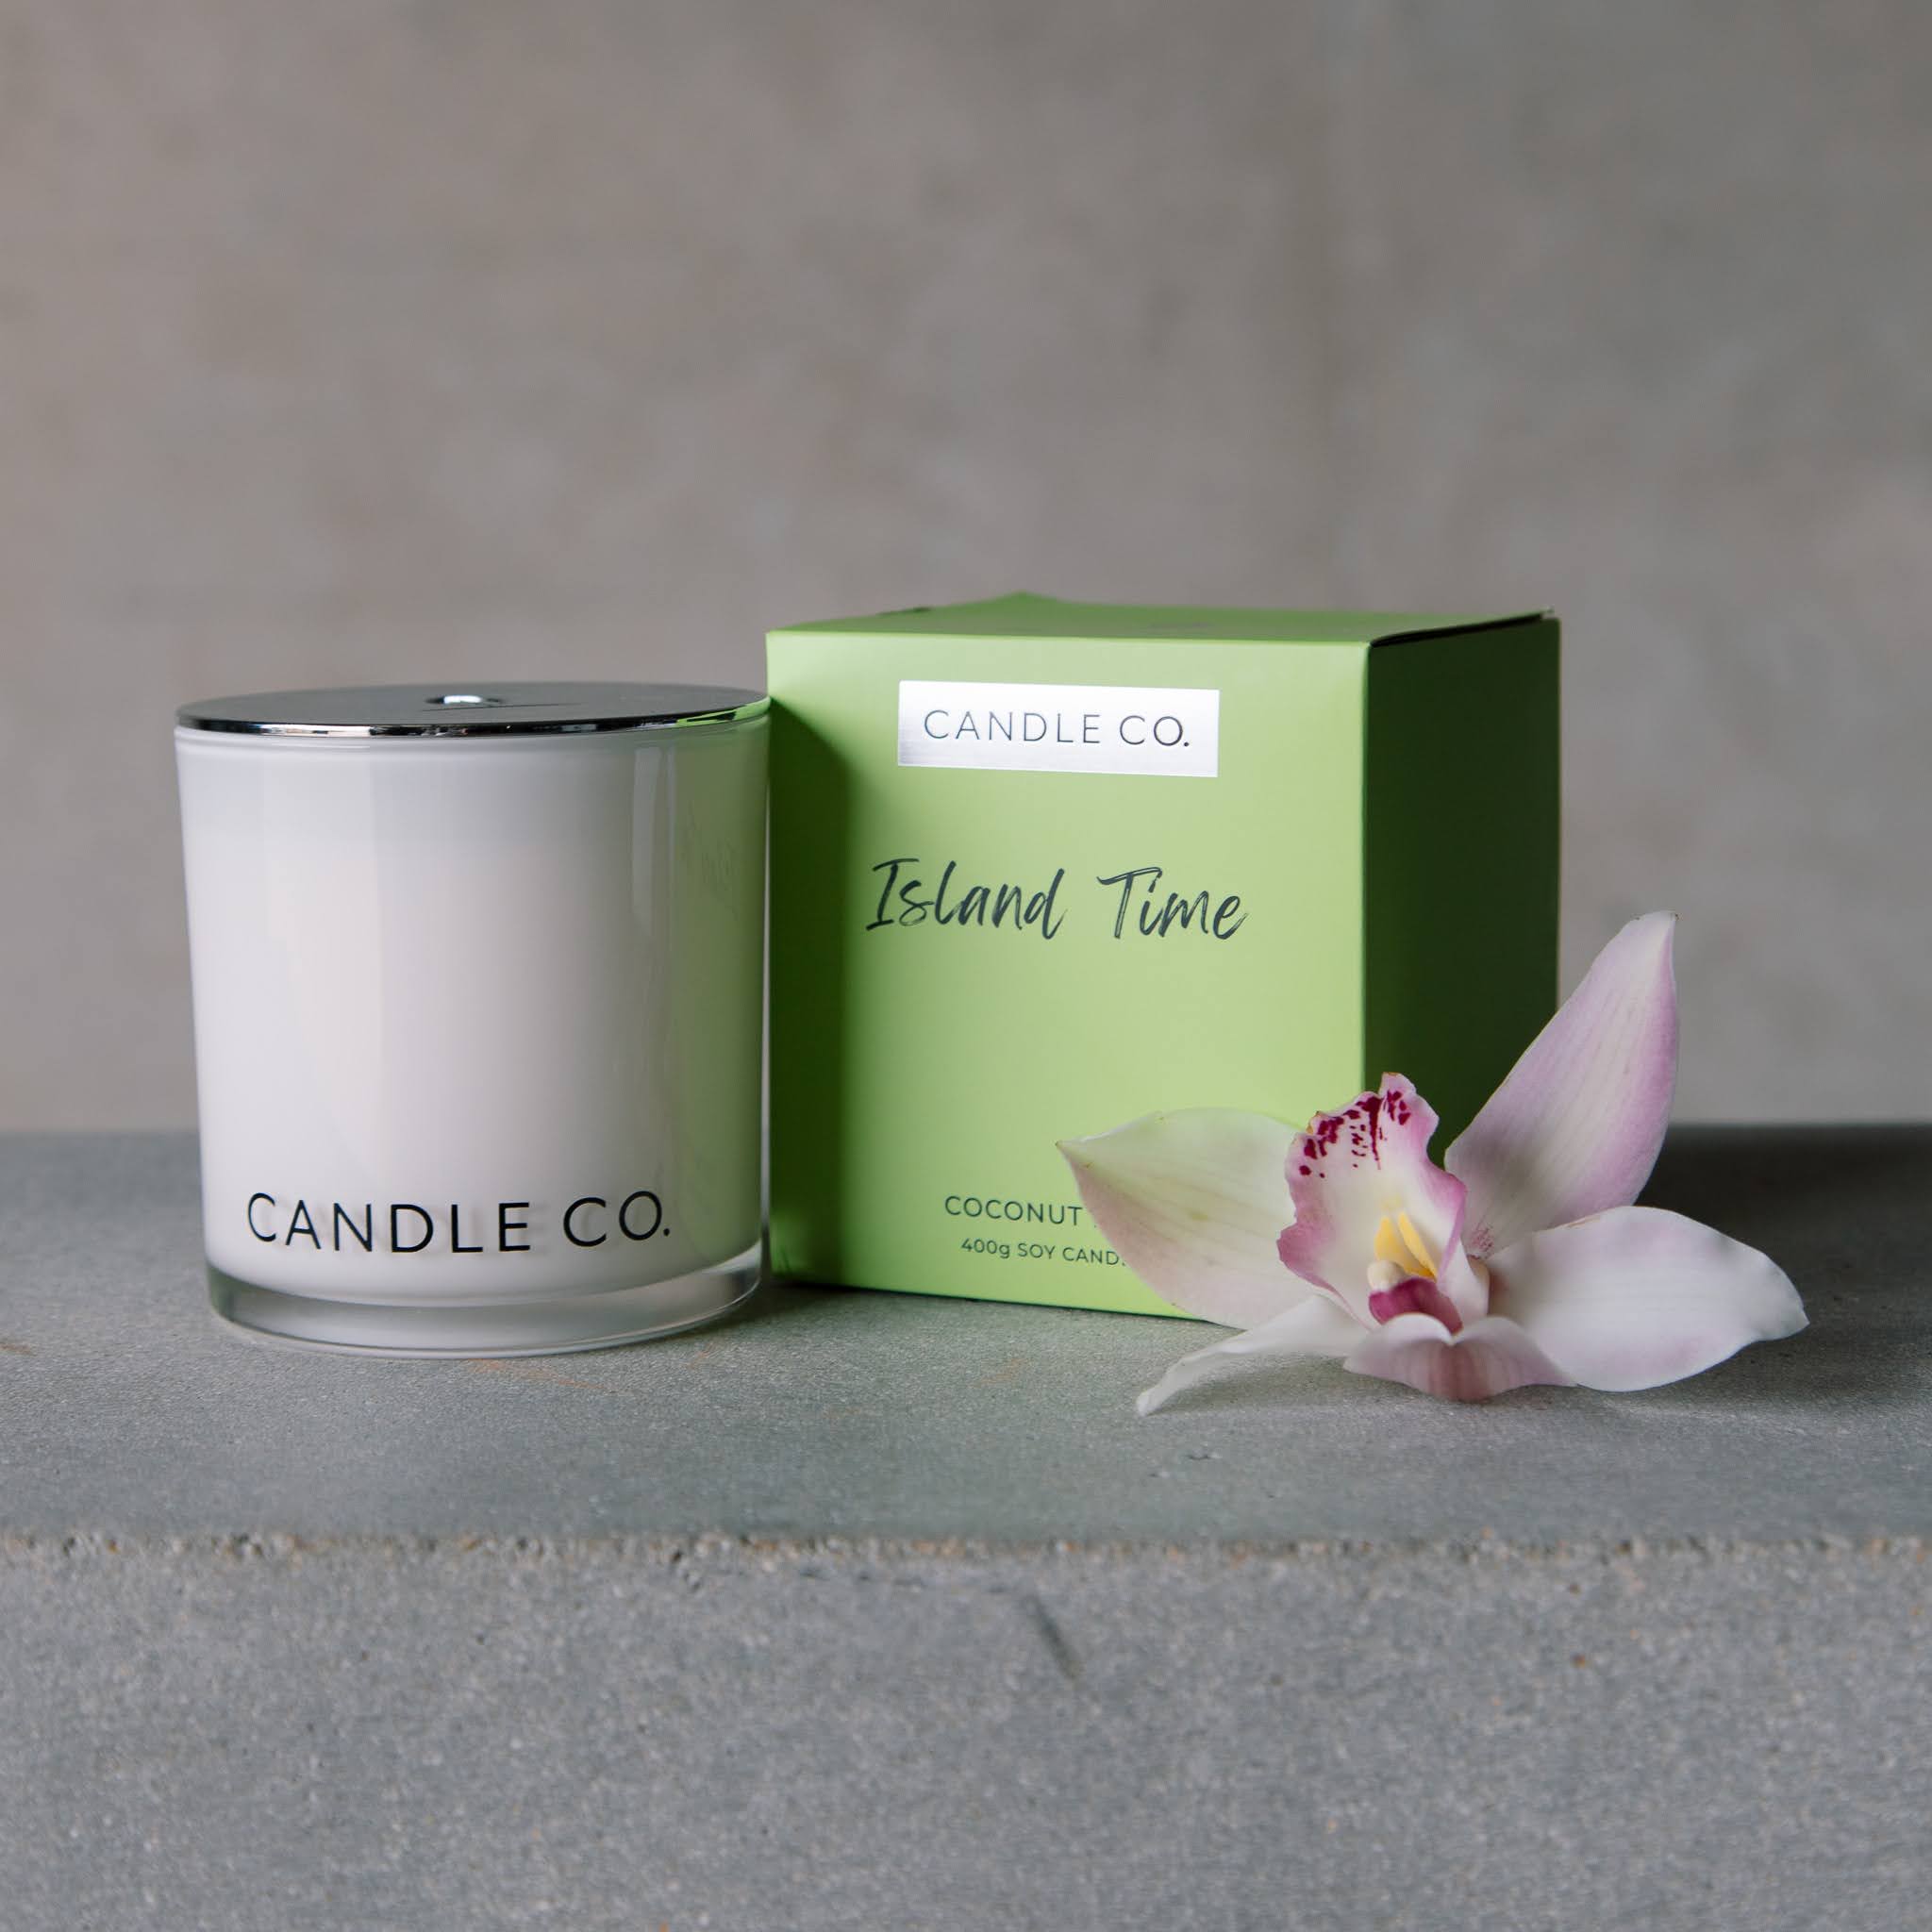 island time candle co. candle, scented candle